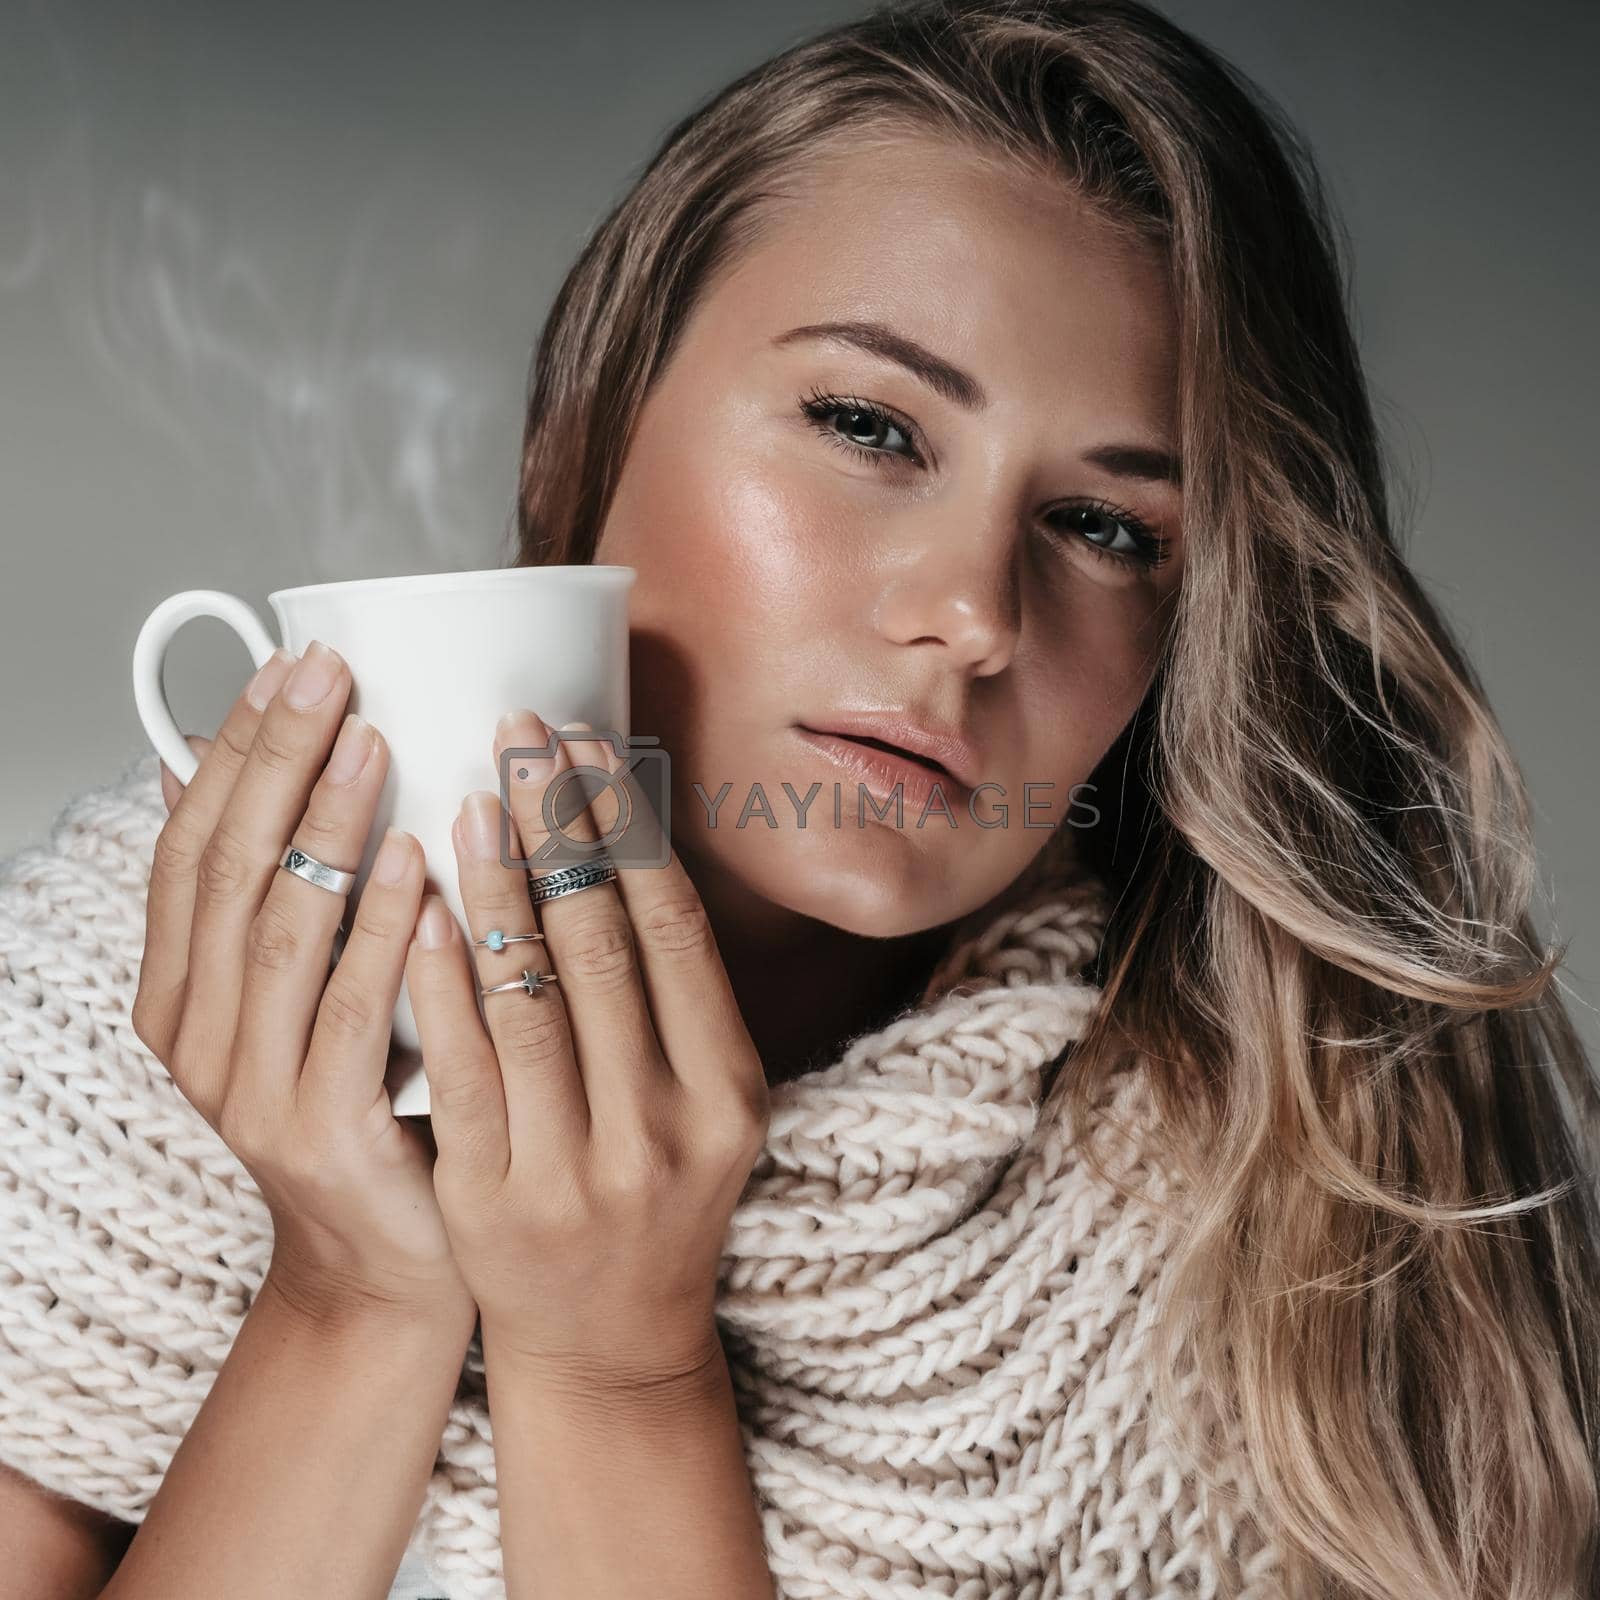 Closeup Portrait of a Beautiful Blond Woman Wearing Big Knitted Scarf Holding Cup of Hot Cappuccino. Fashion Autumn Look.